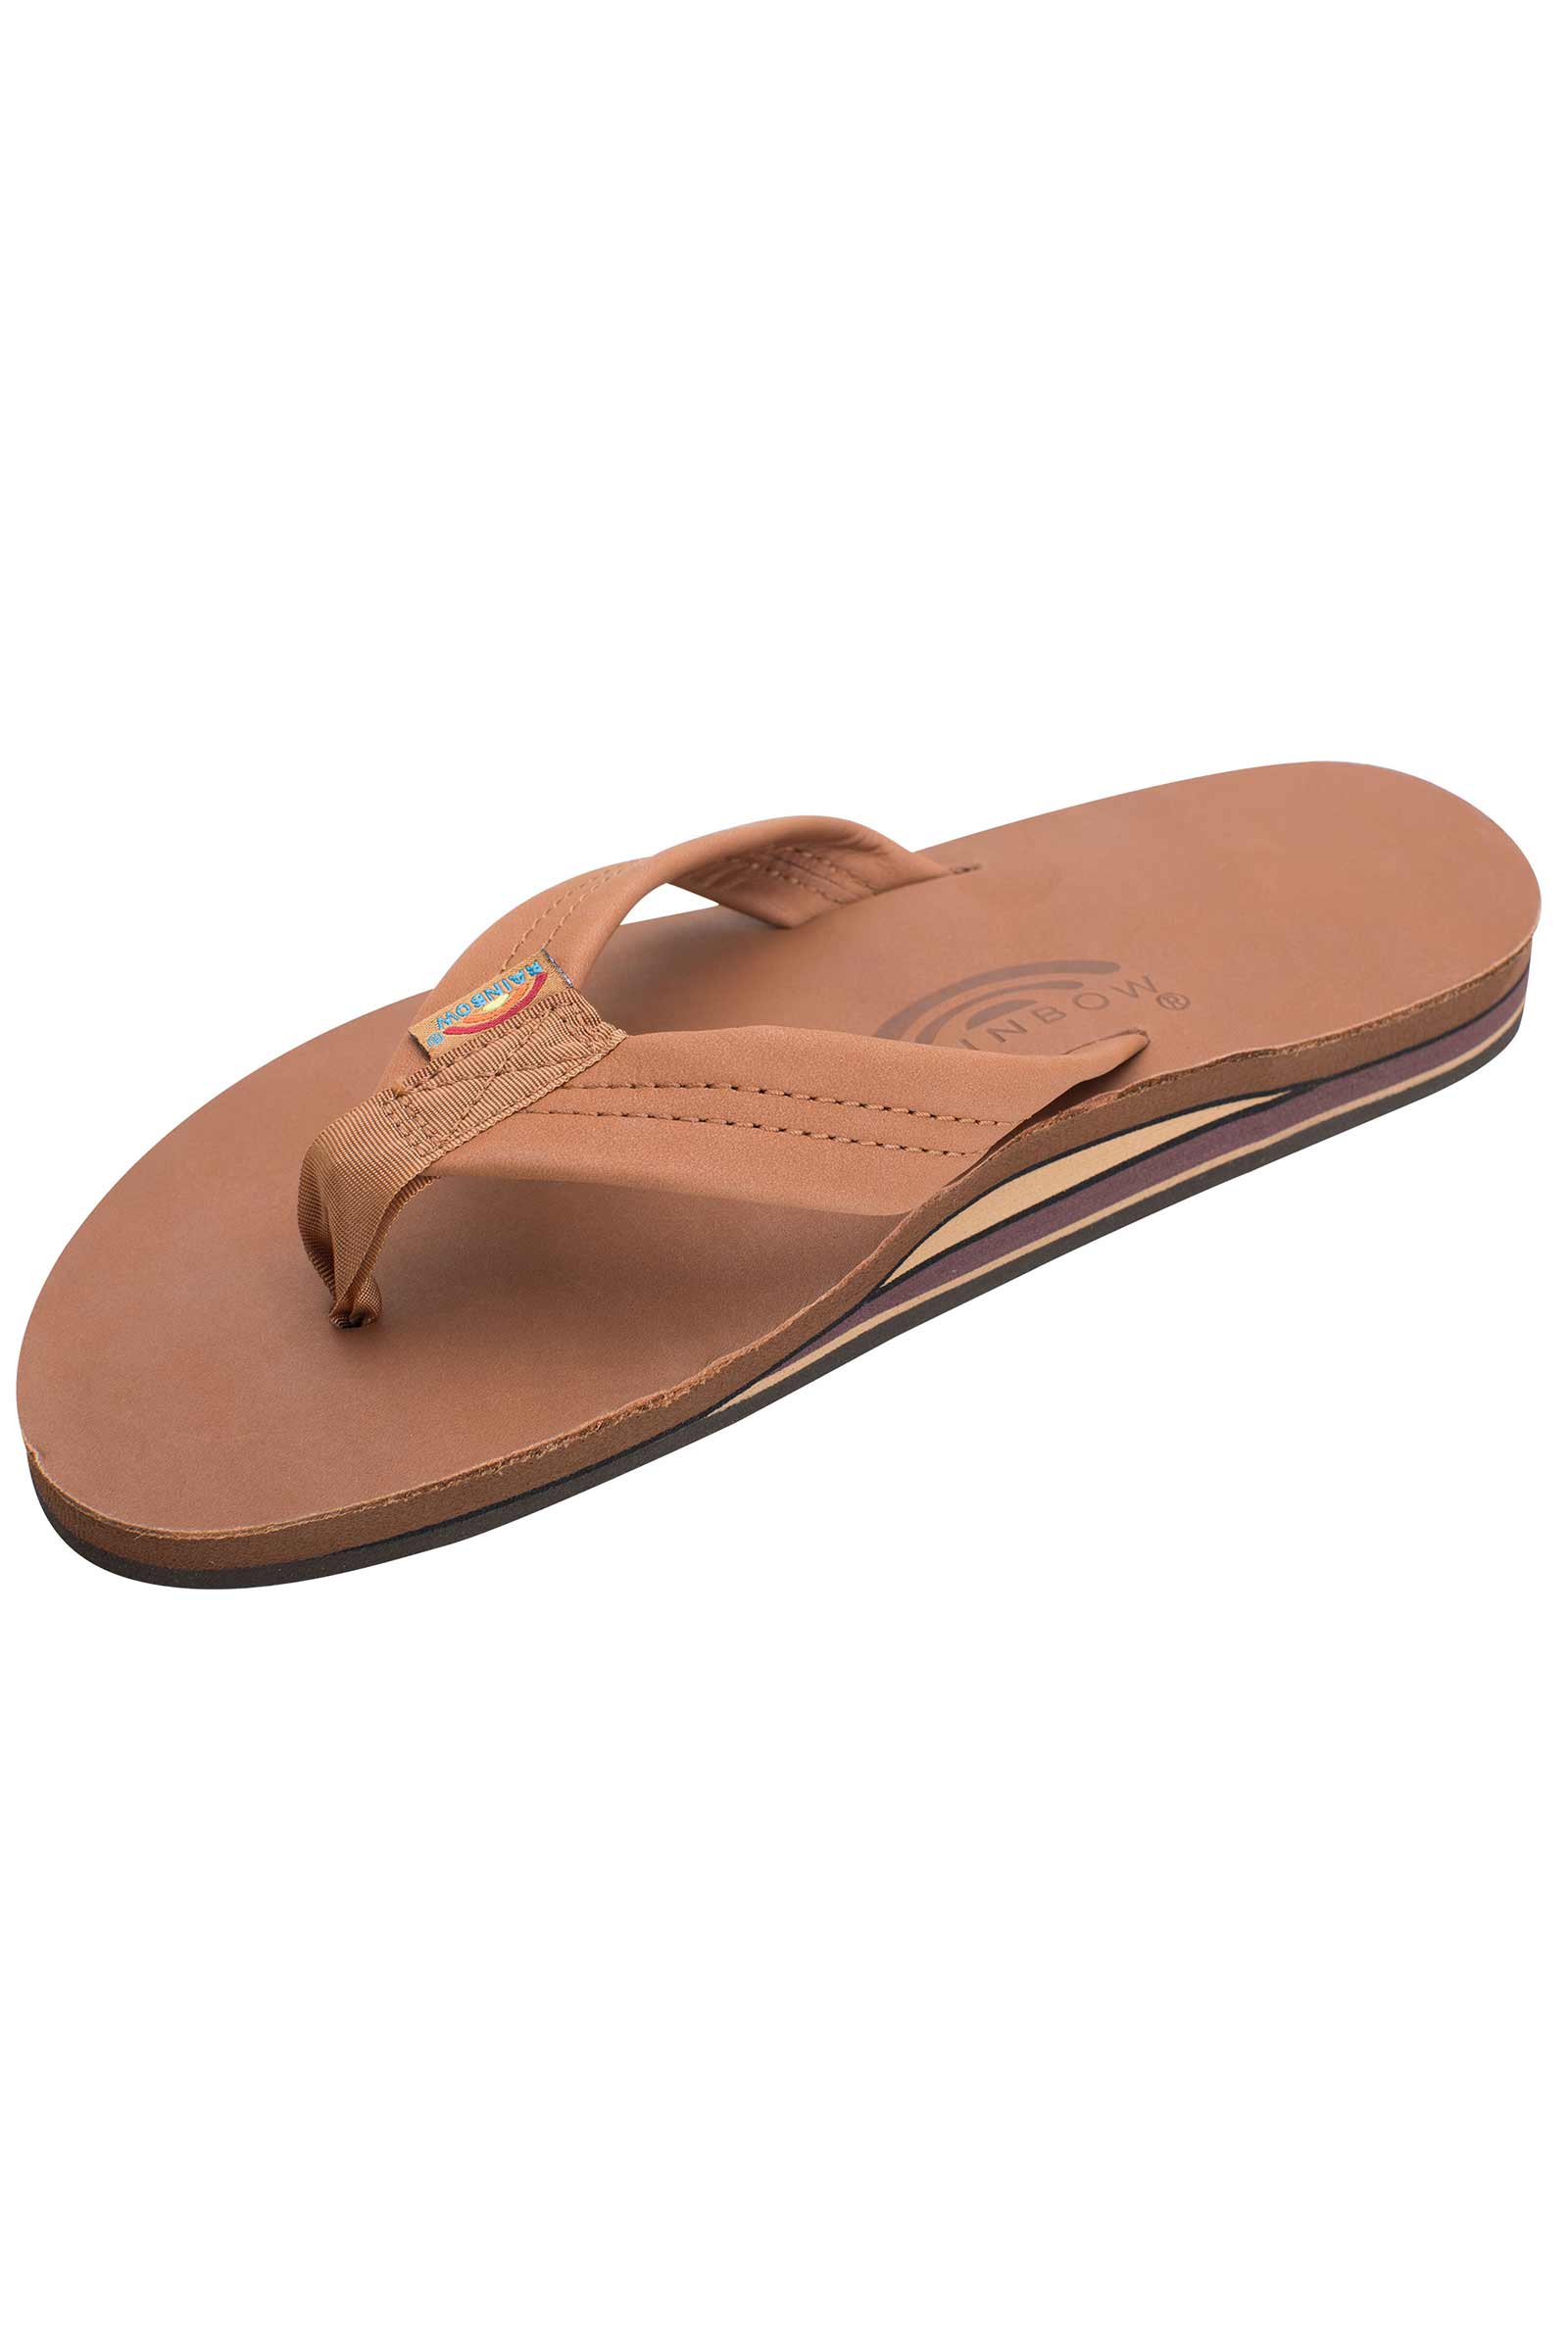 Mens Rainbow Sandals Classic Double Tan & Brown